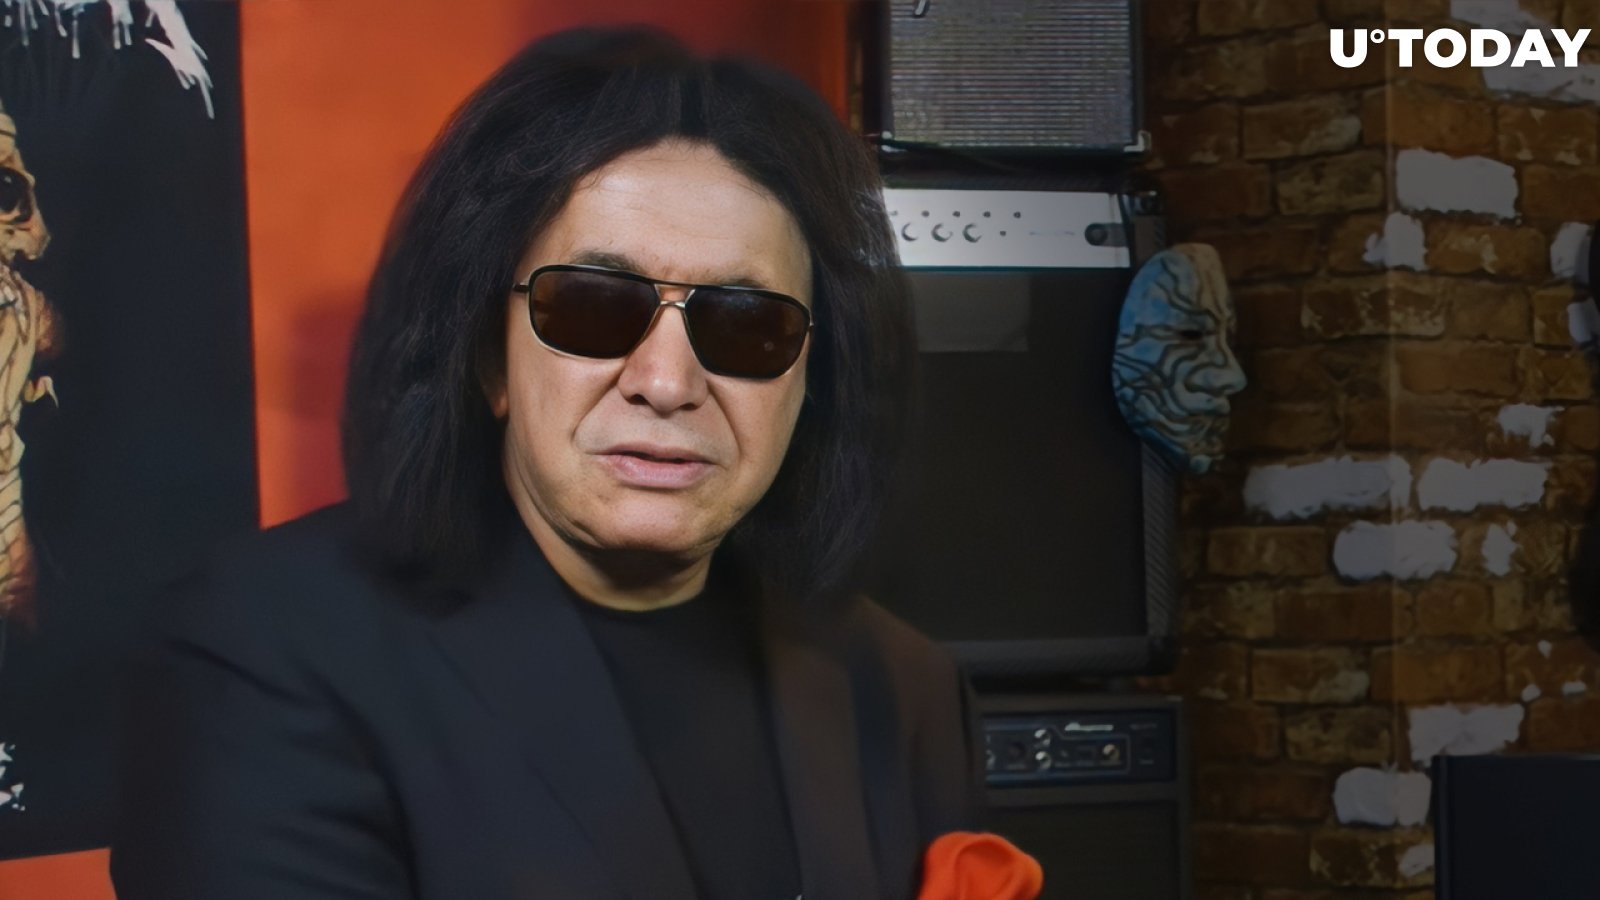 Kiss Singer Gene Simmons Claims He Hasn't Sold His Litecoin and 13 Other Crypto Holdings